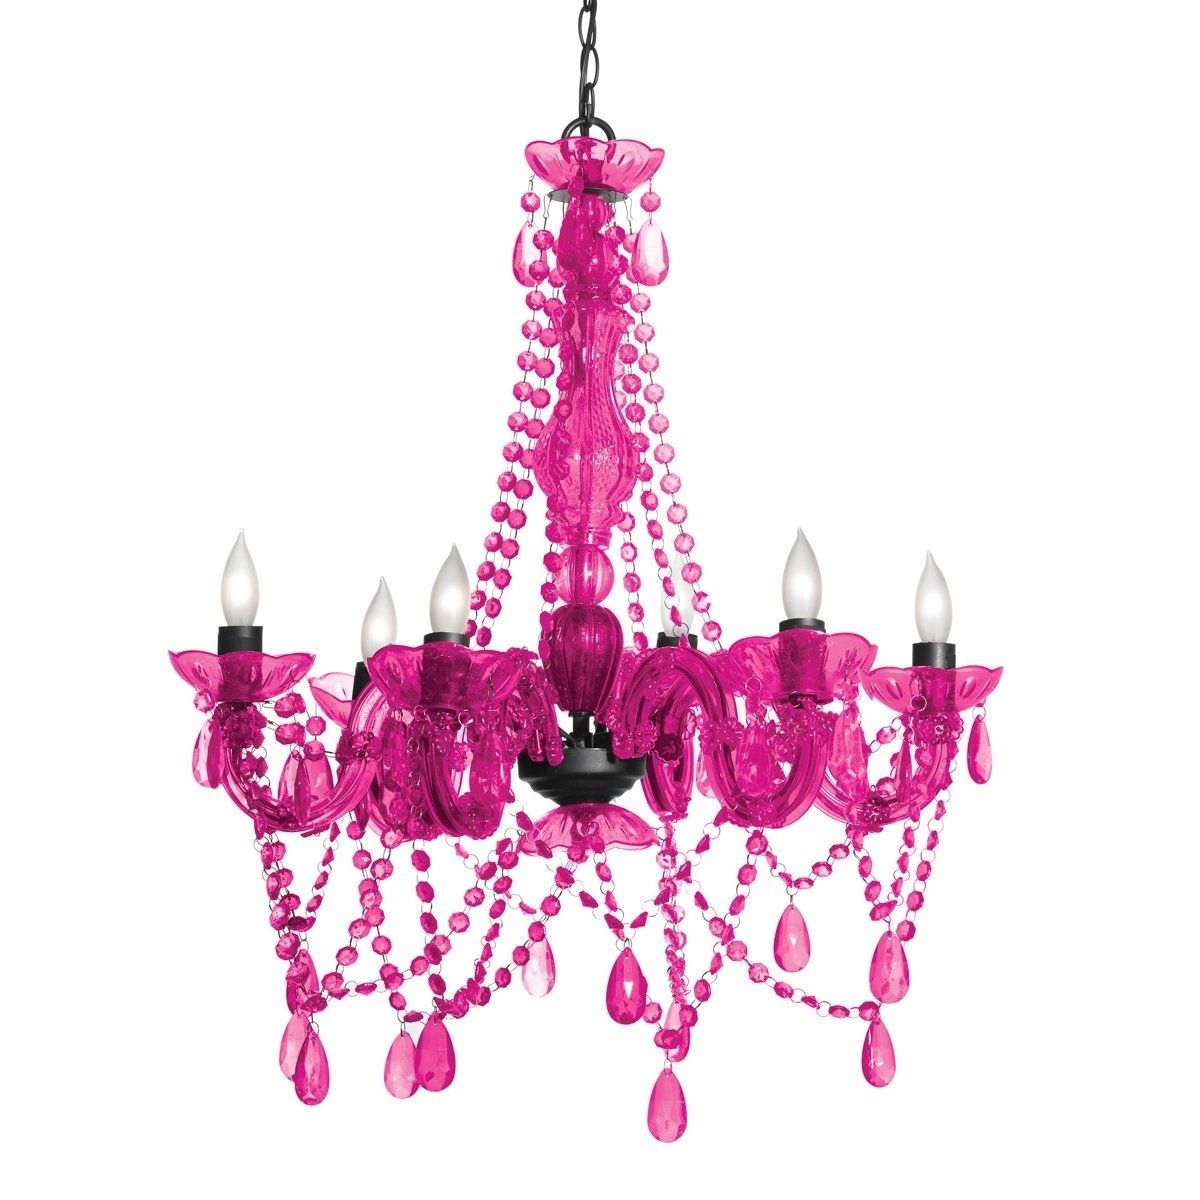 Popular Affordable Chandeliers For Girls To Teens' Rooms Intended For Pink Gypsy Chandeliers (View 3 of 20)